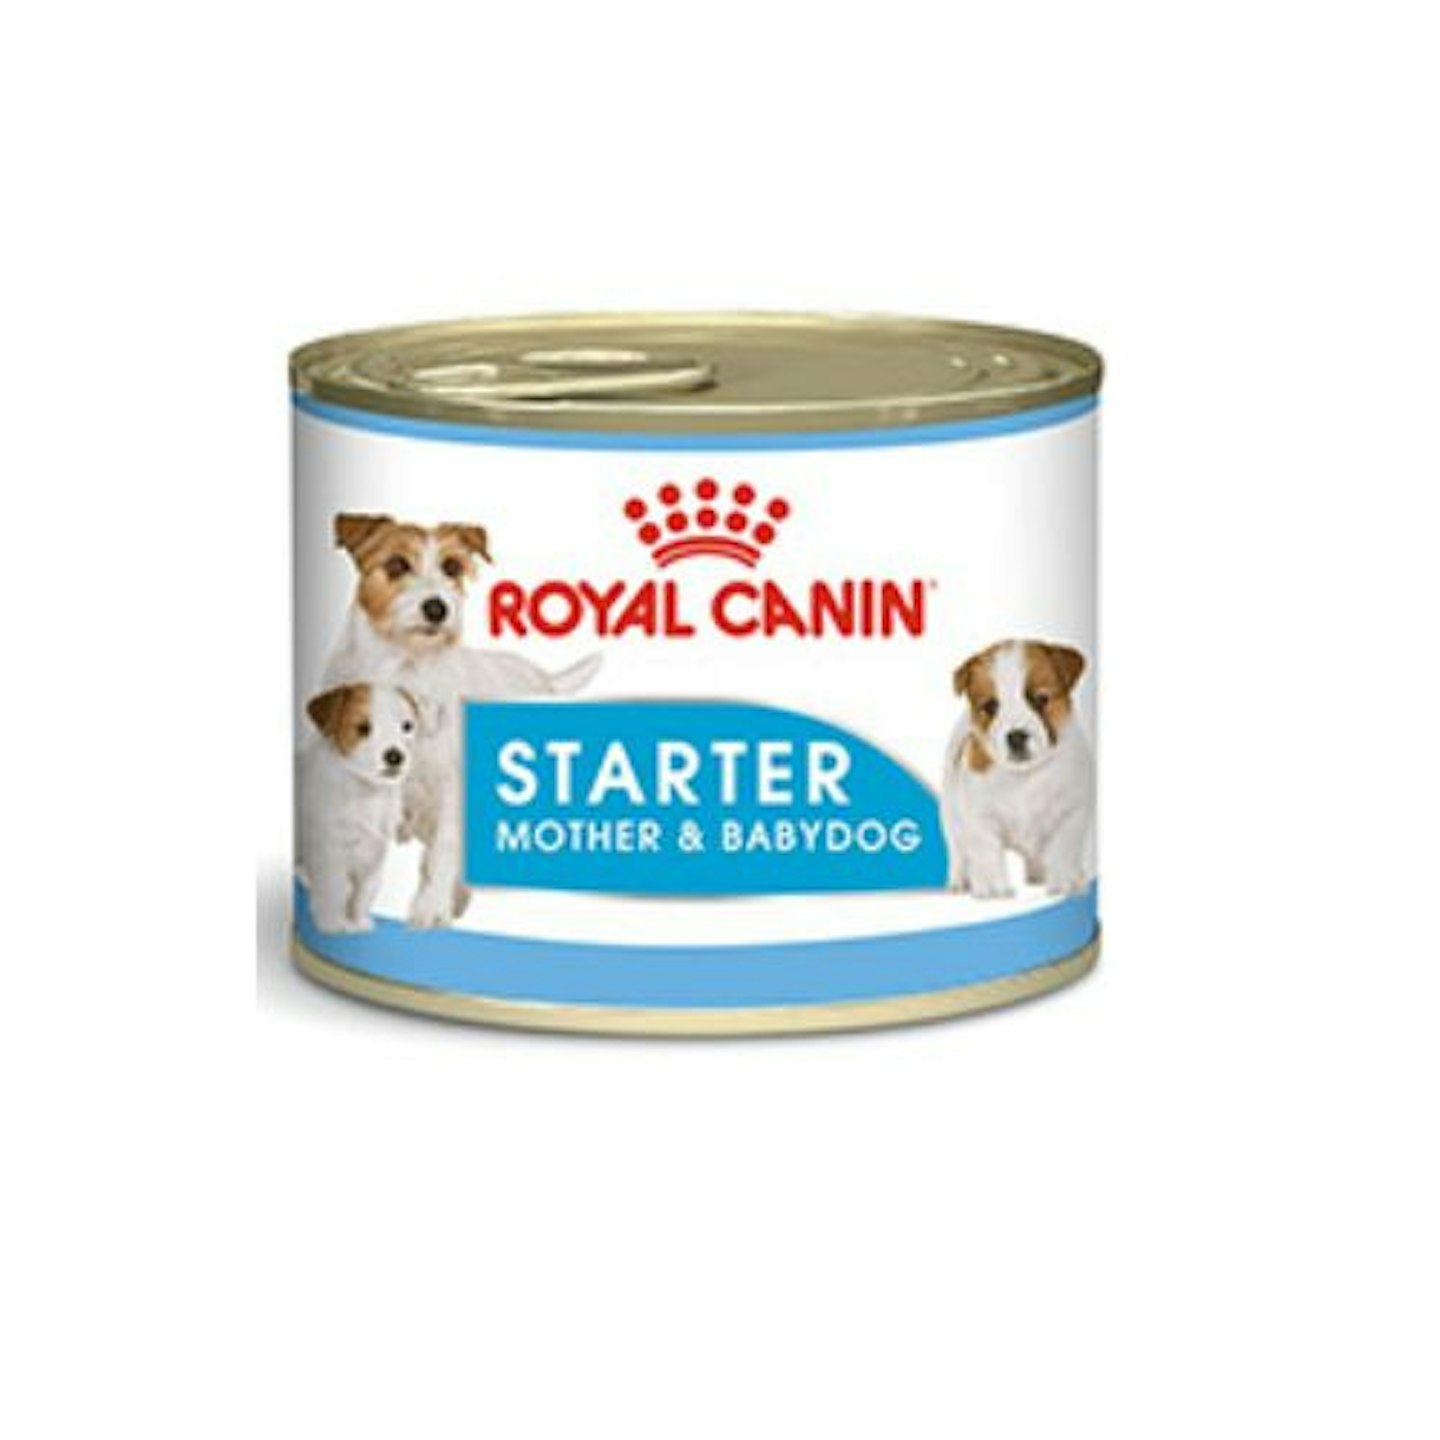 Royal Canin Starter Mother and Babydog Wet Adult Dog and Puppy Food